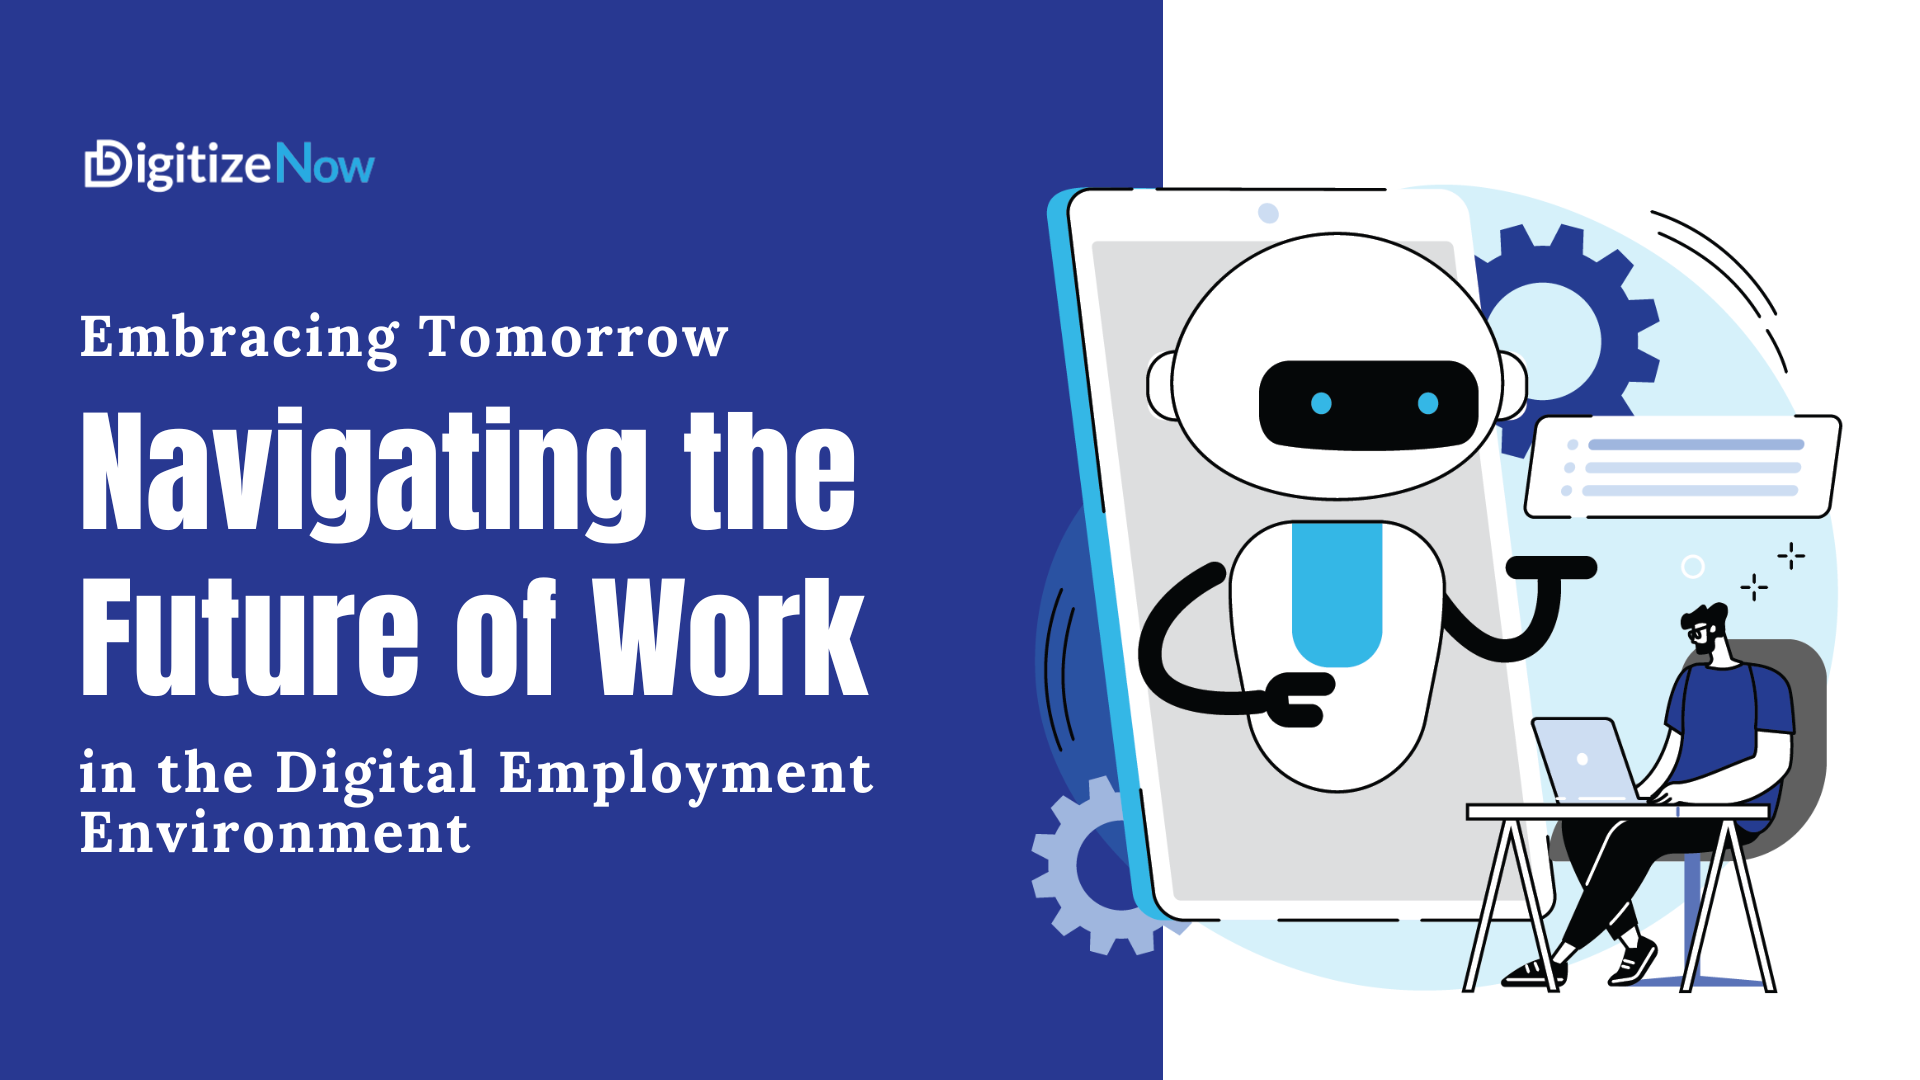 Impact on future of work from AI and automation